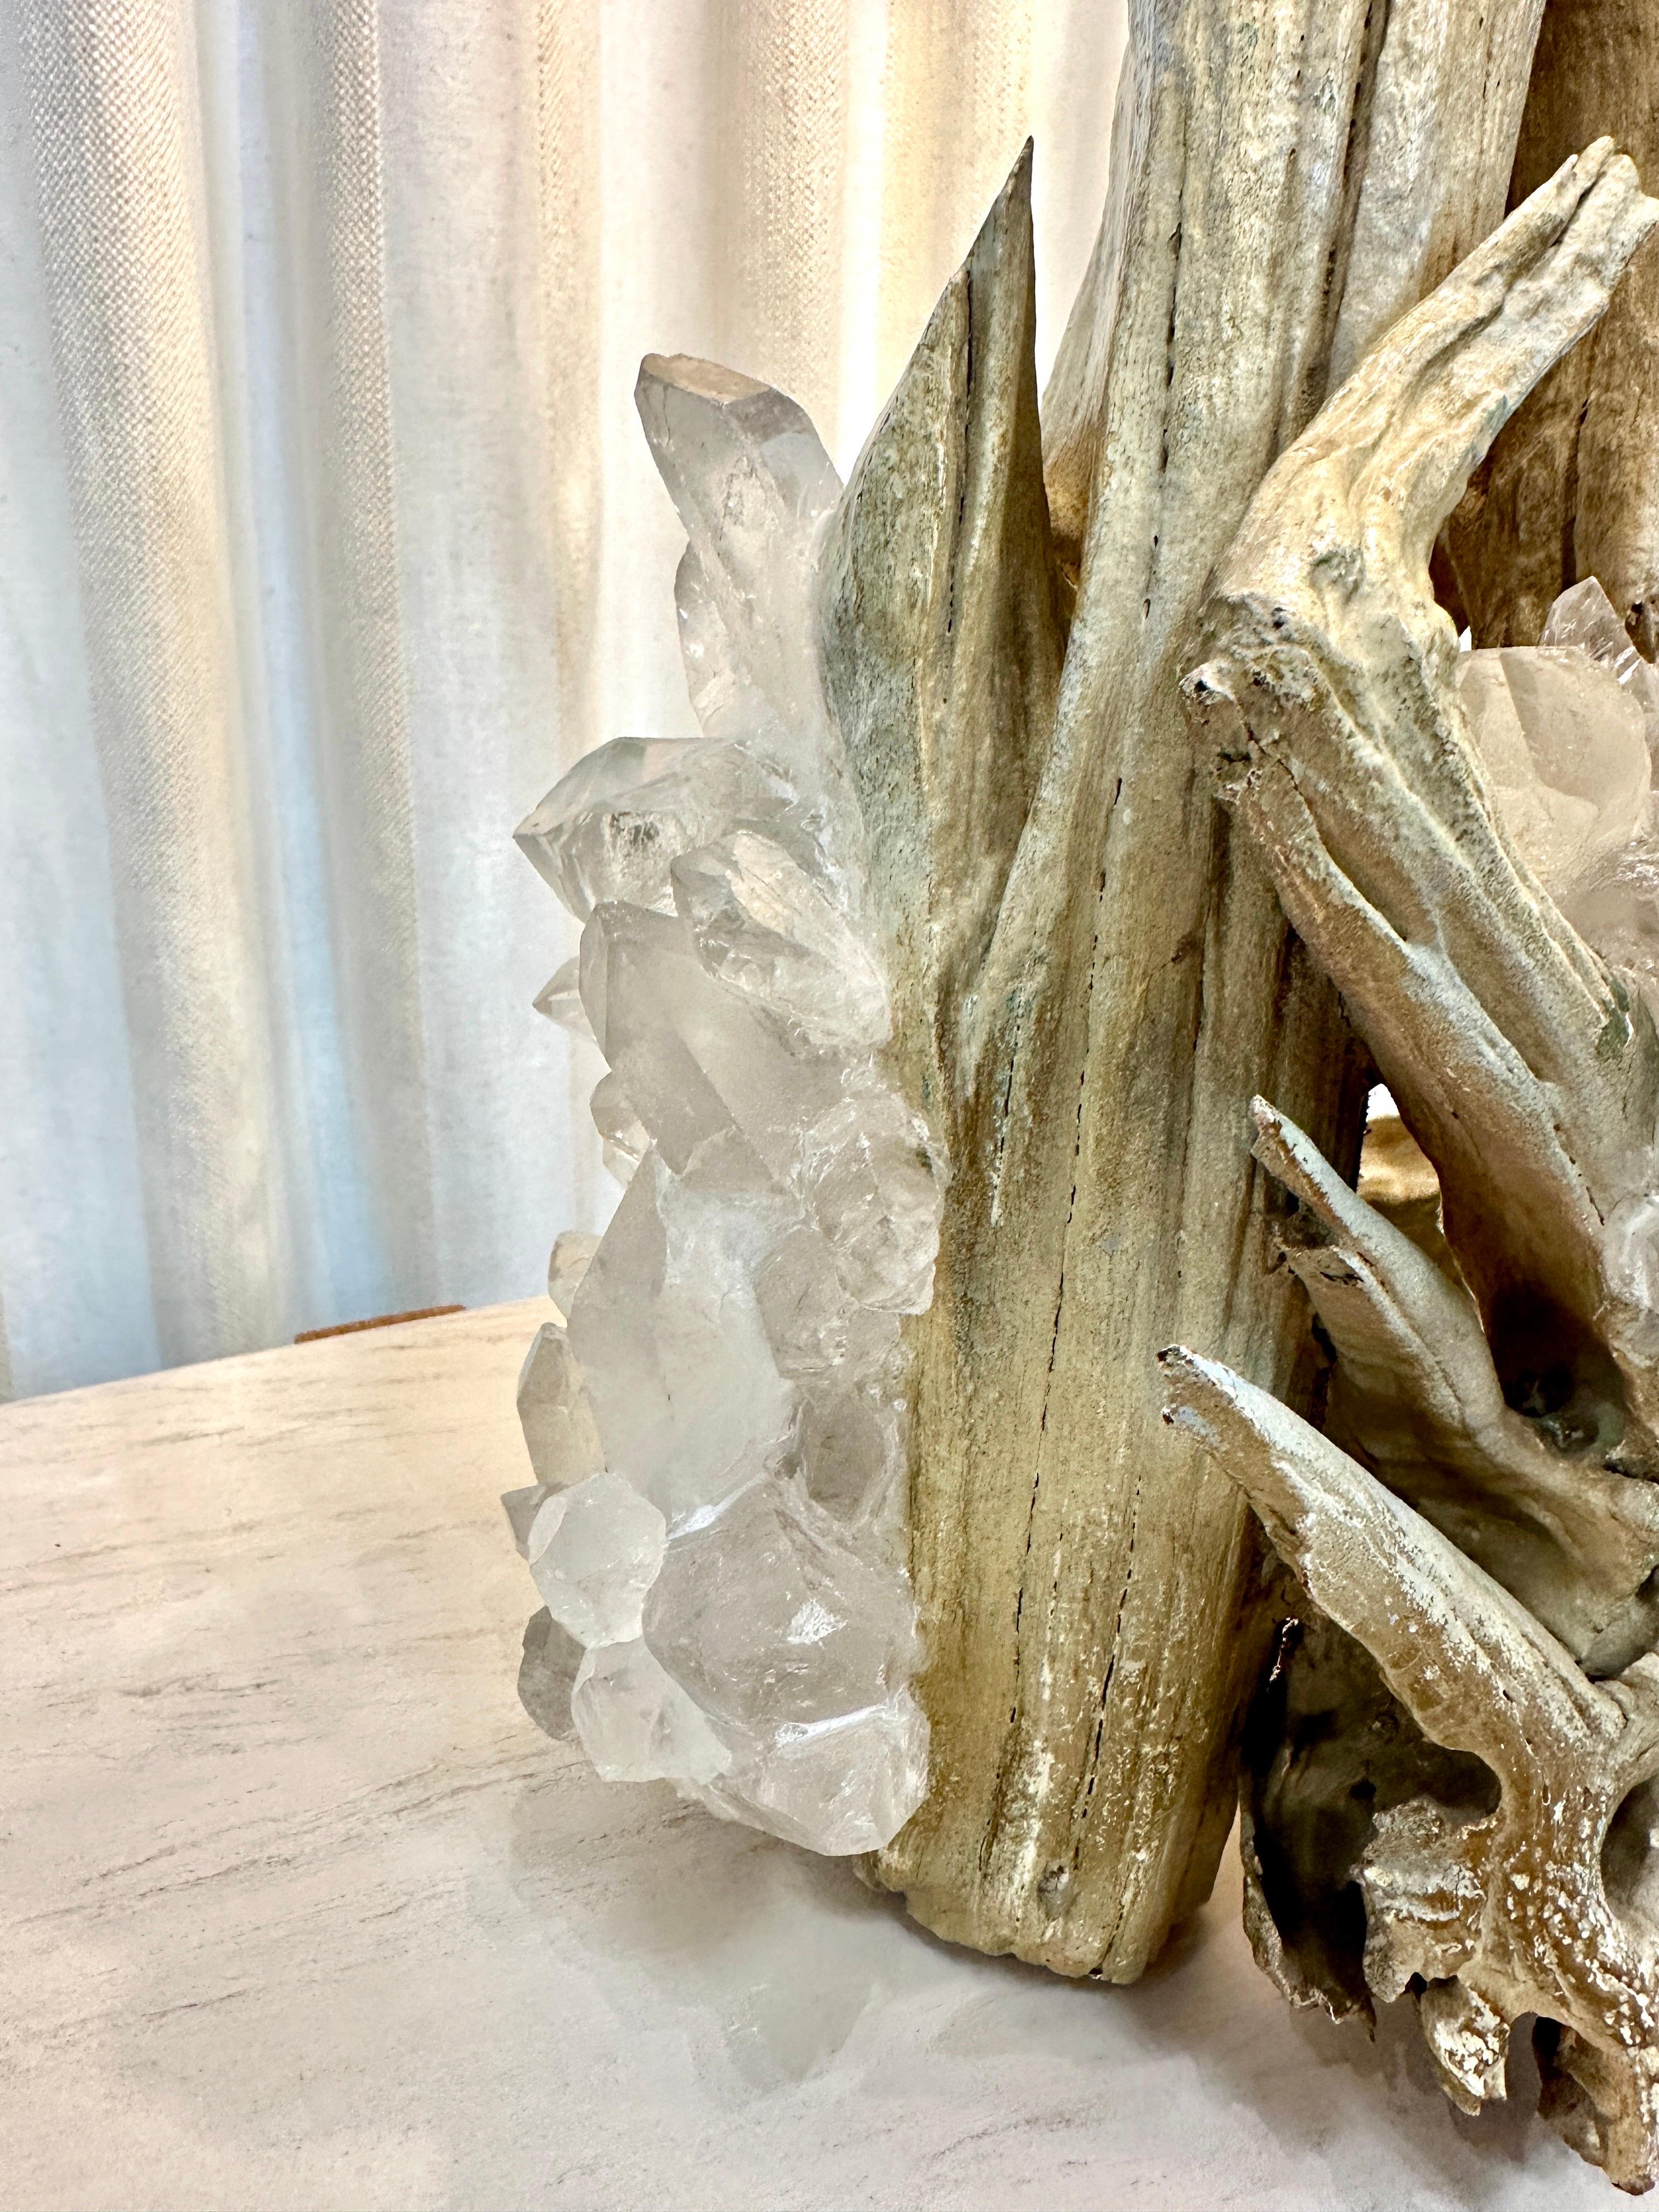 Mid-20th Century Vintage Driftwood Lamp w/ Encrusted Quartz Crystal Shards For Sale